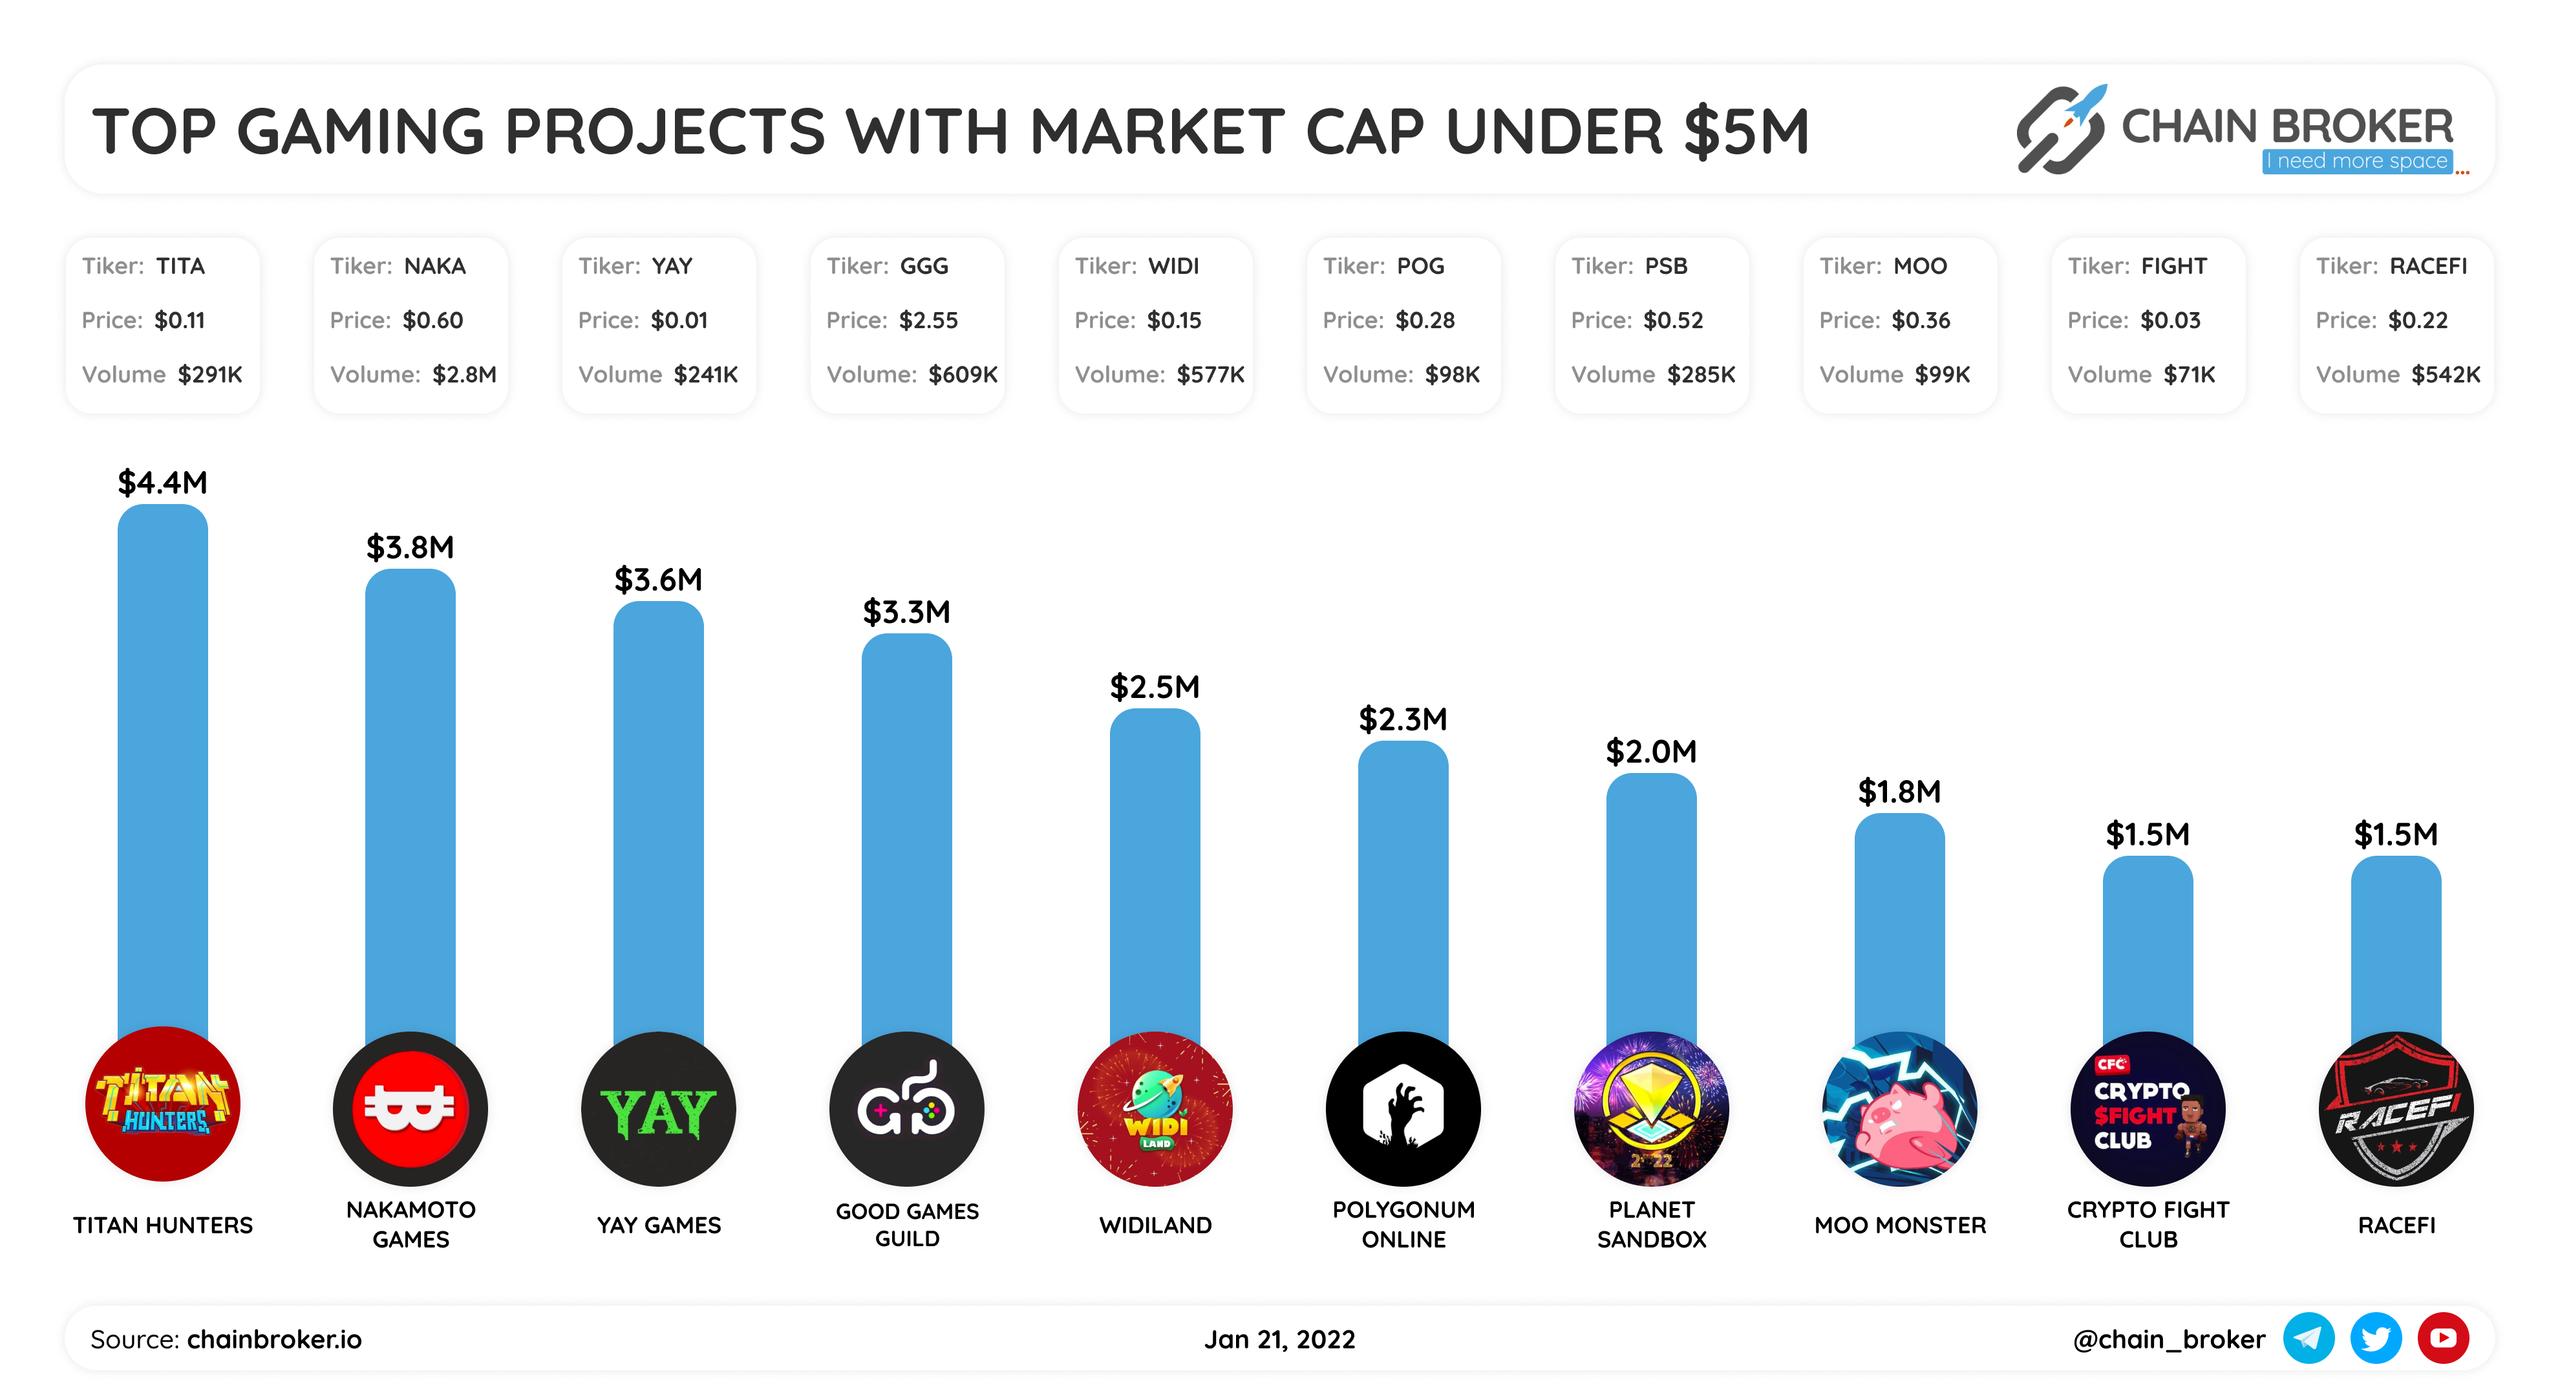 Top projects with market cap under $5M